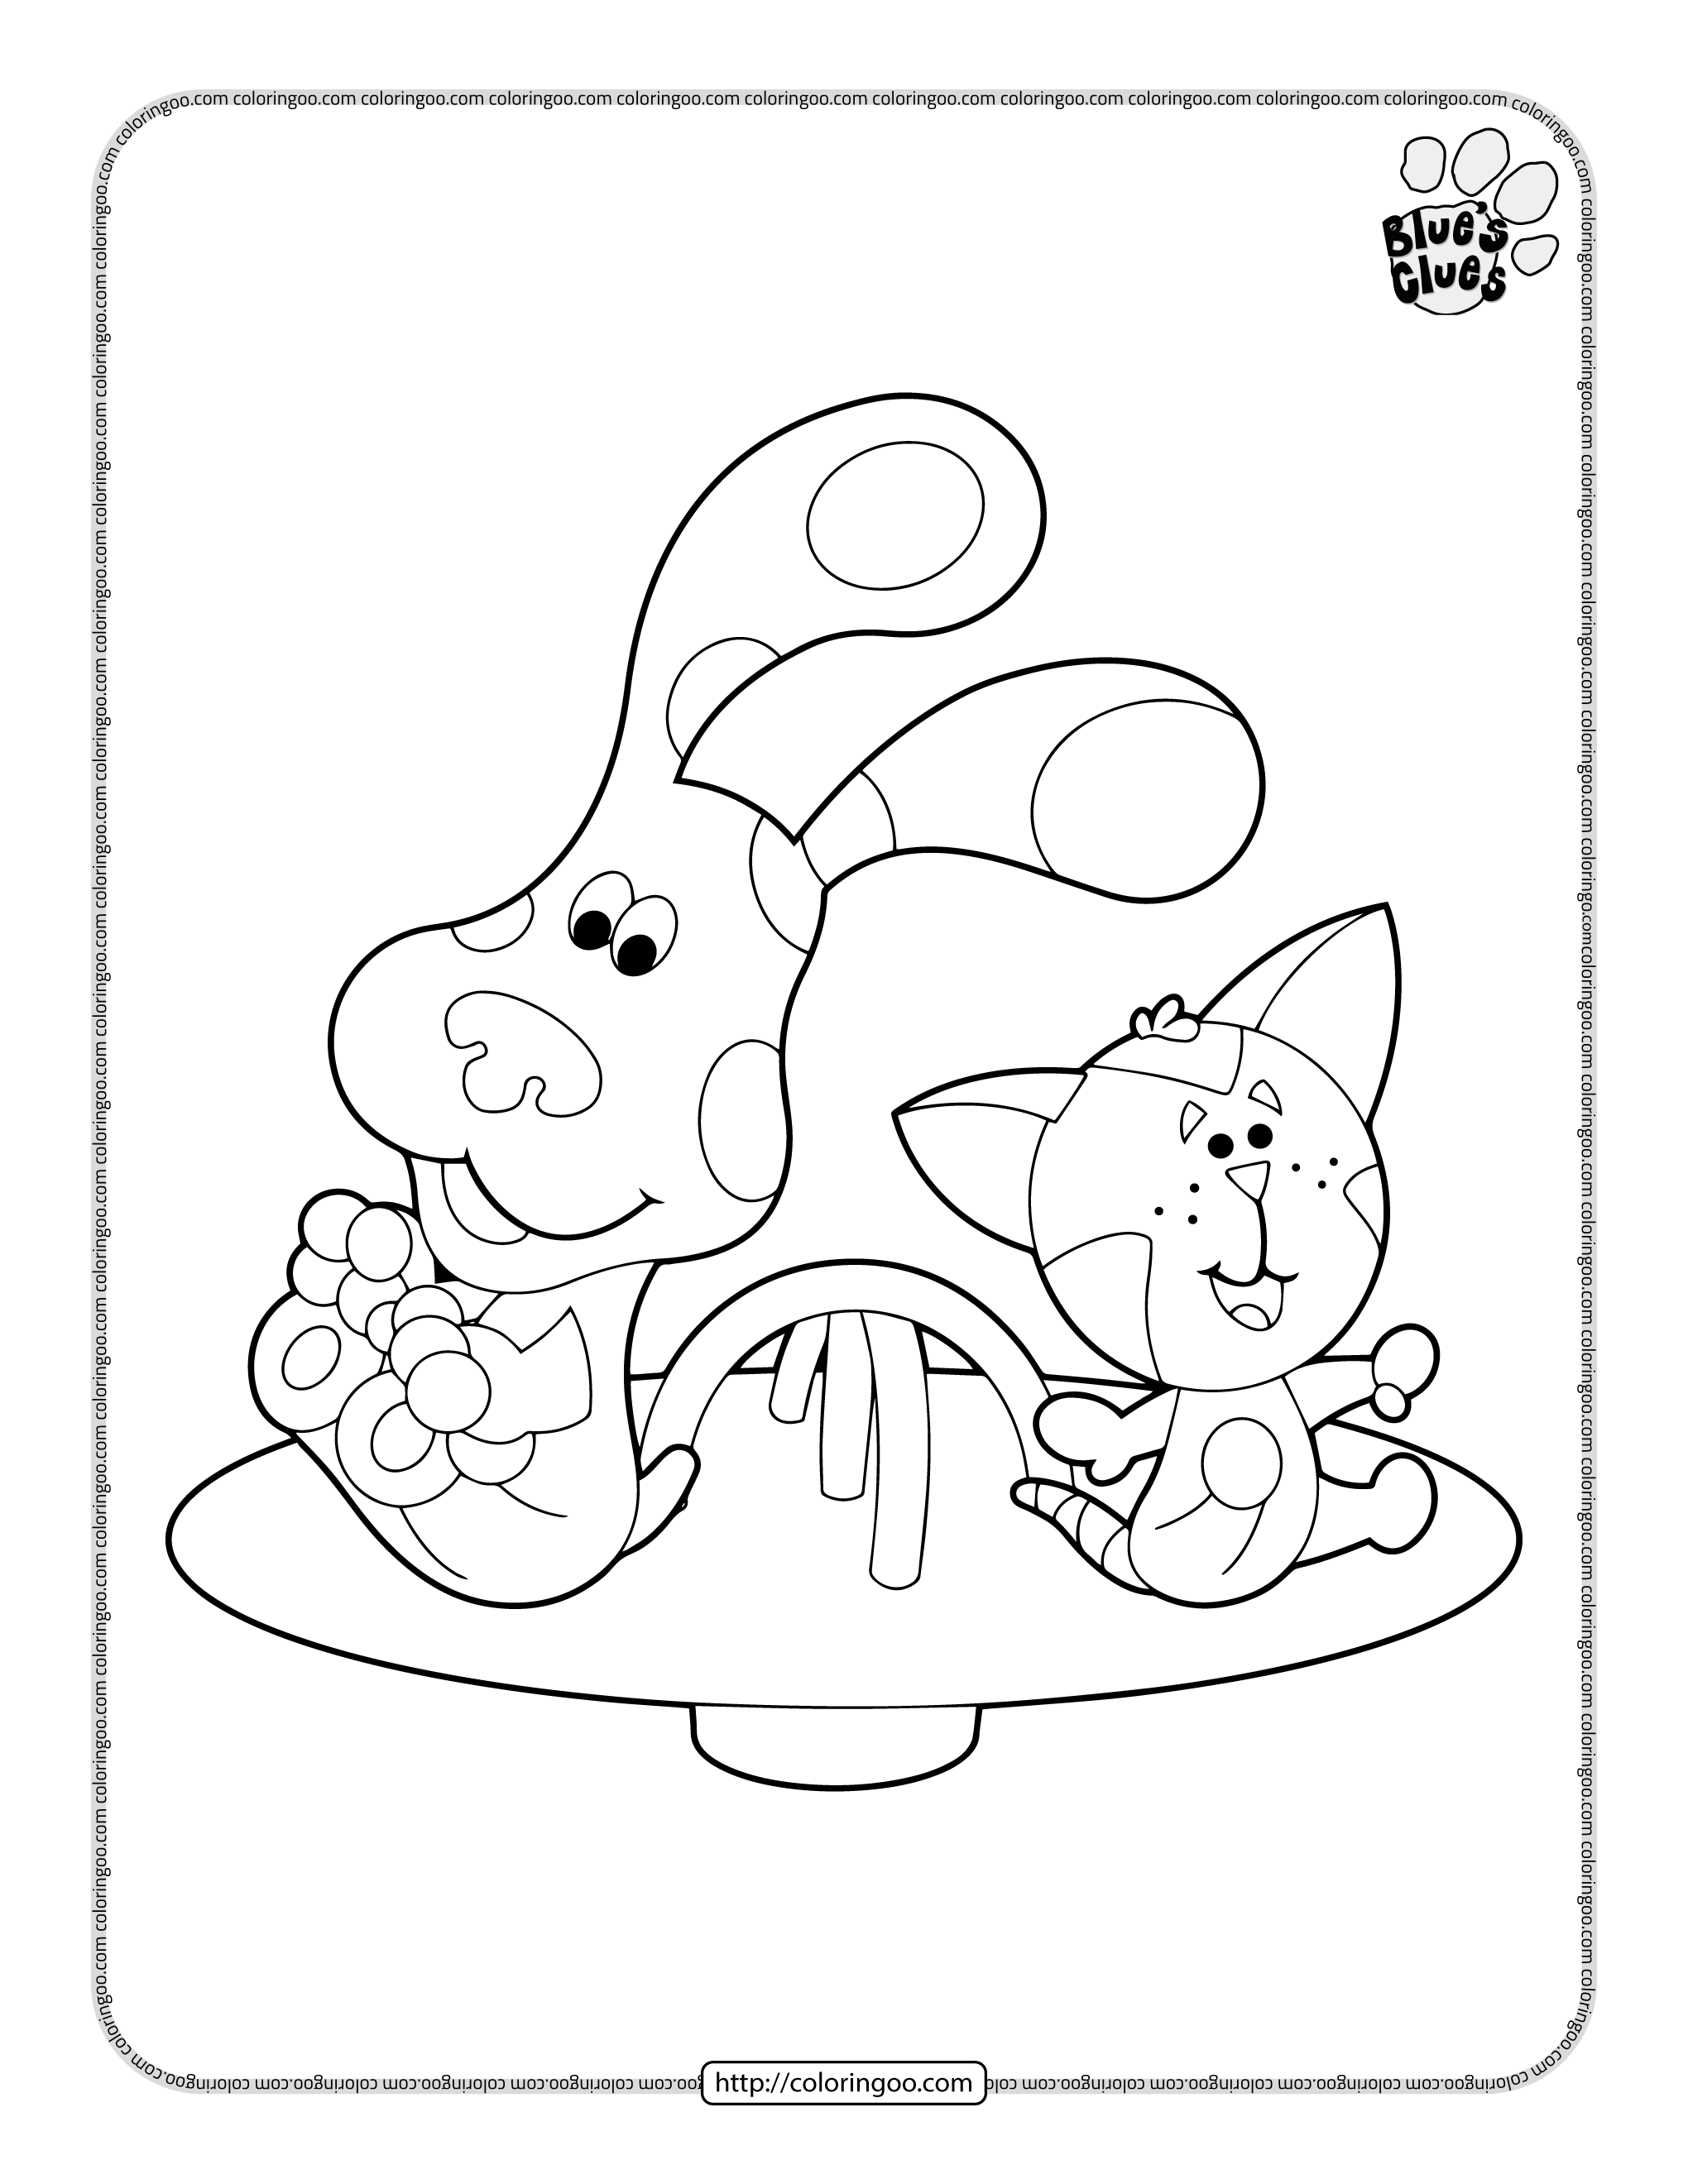 blue and periwinkle pdf coloring sheet